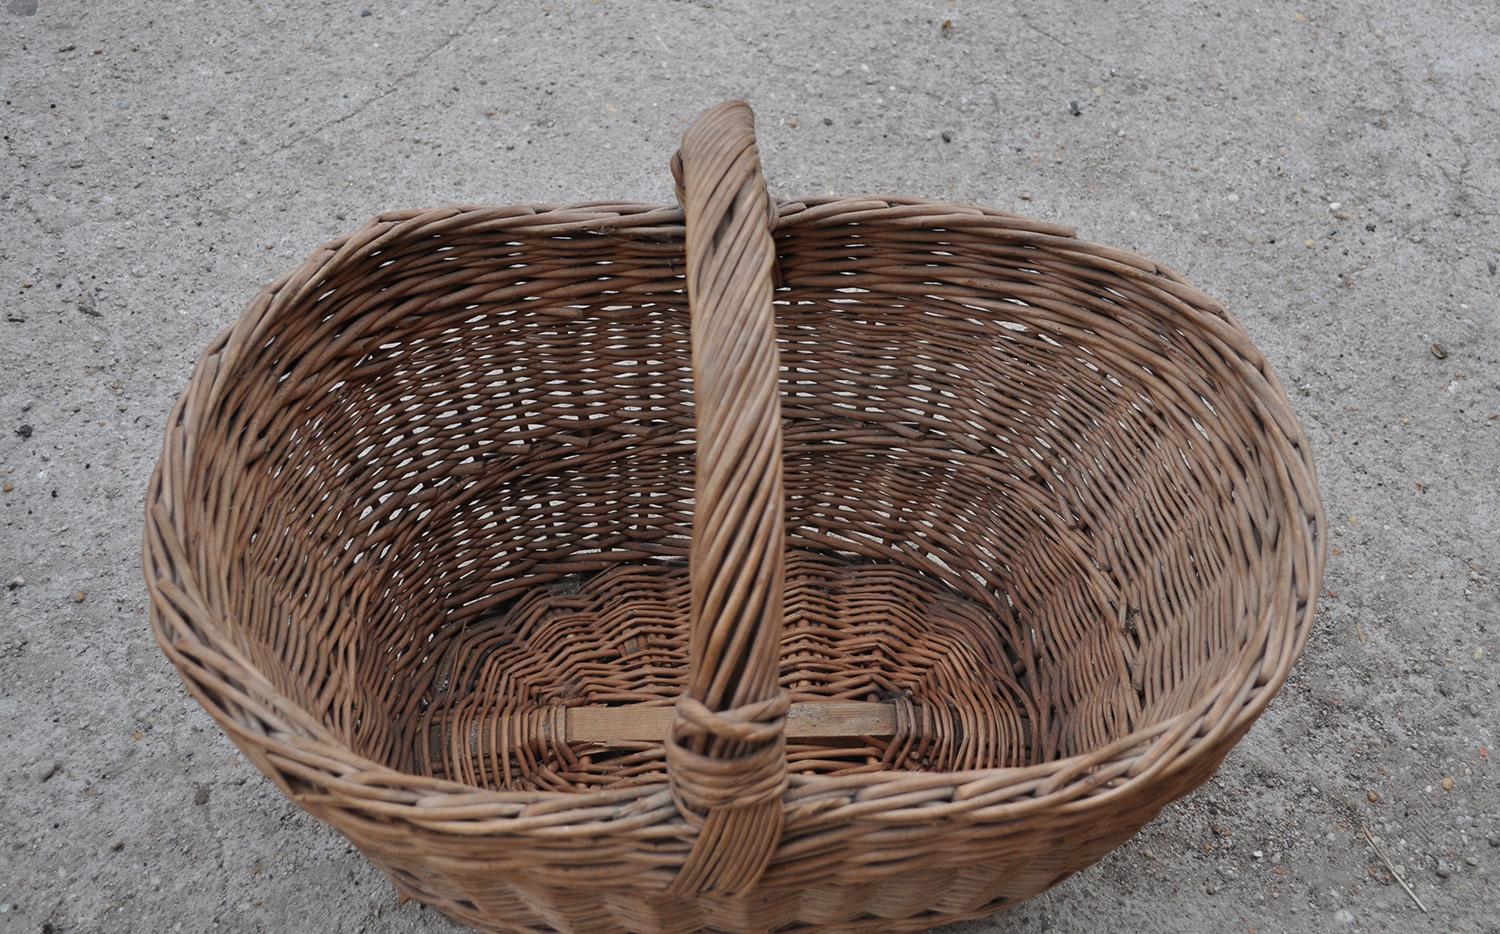 Hungarian Old Handwoven Wicker Basket For Sale